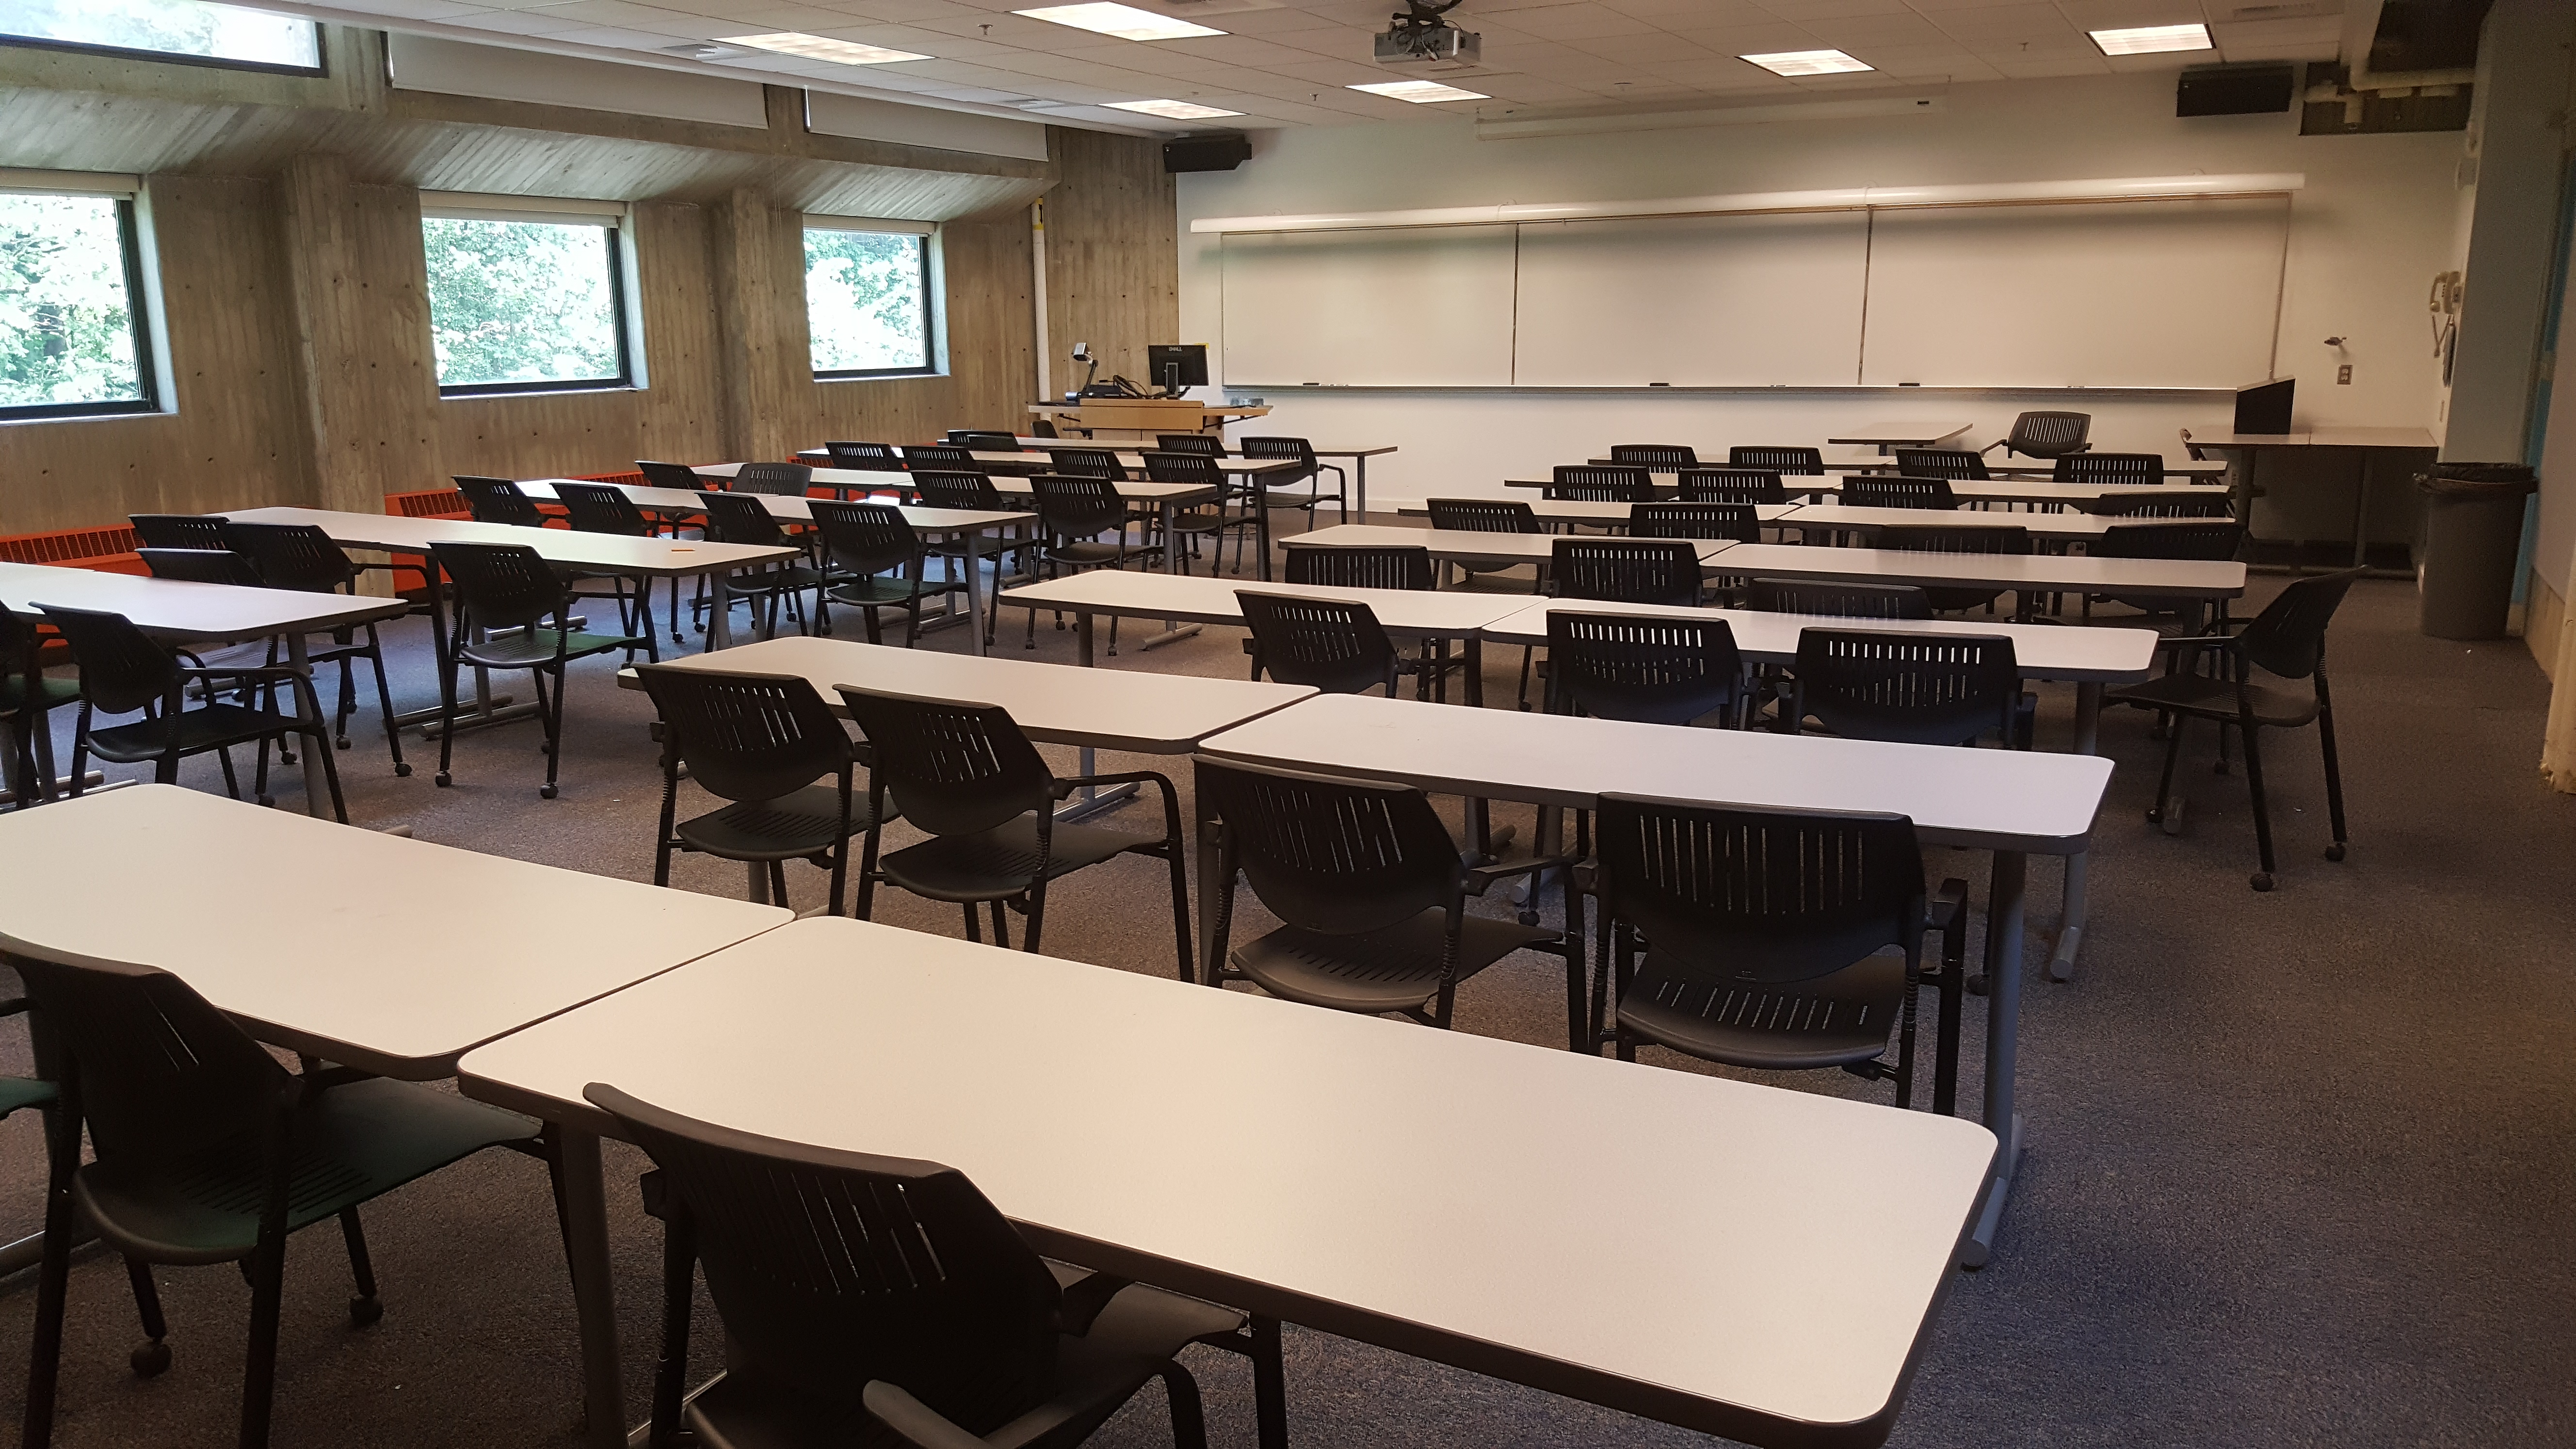 Room Consists of hard floors, moveable tables and chairs, a white board and podium are both located at the front of the room.